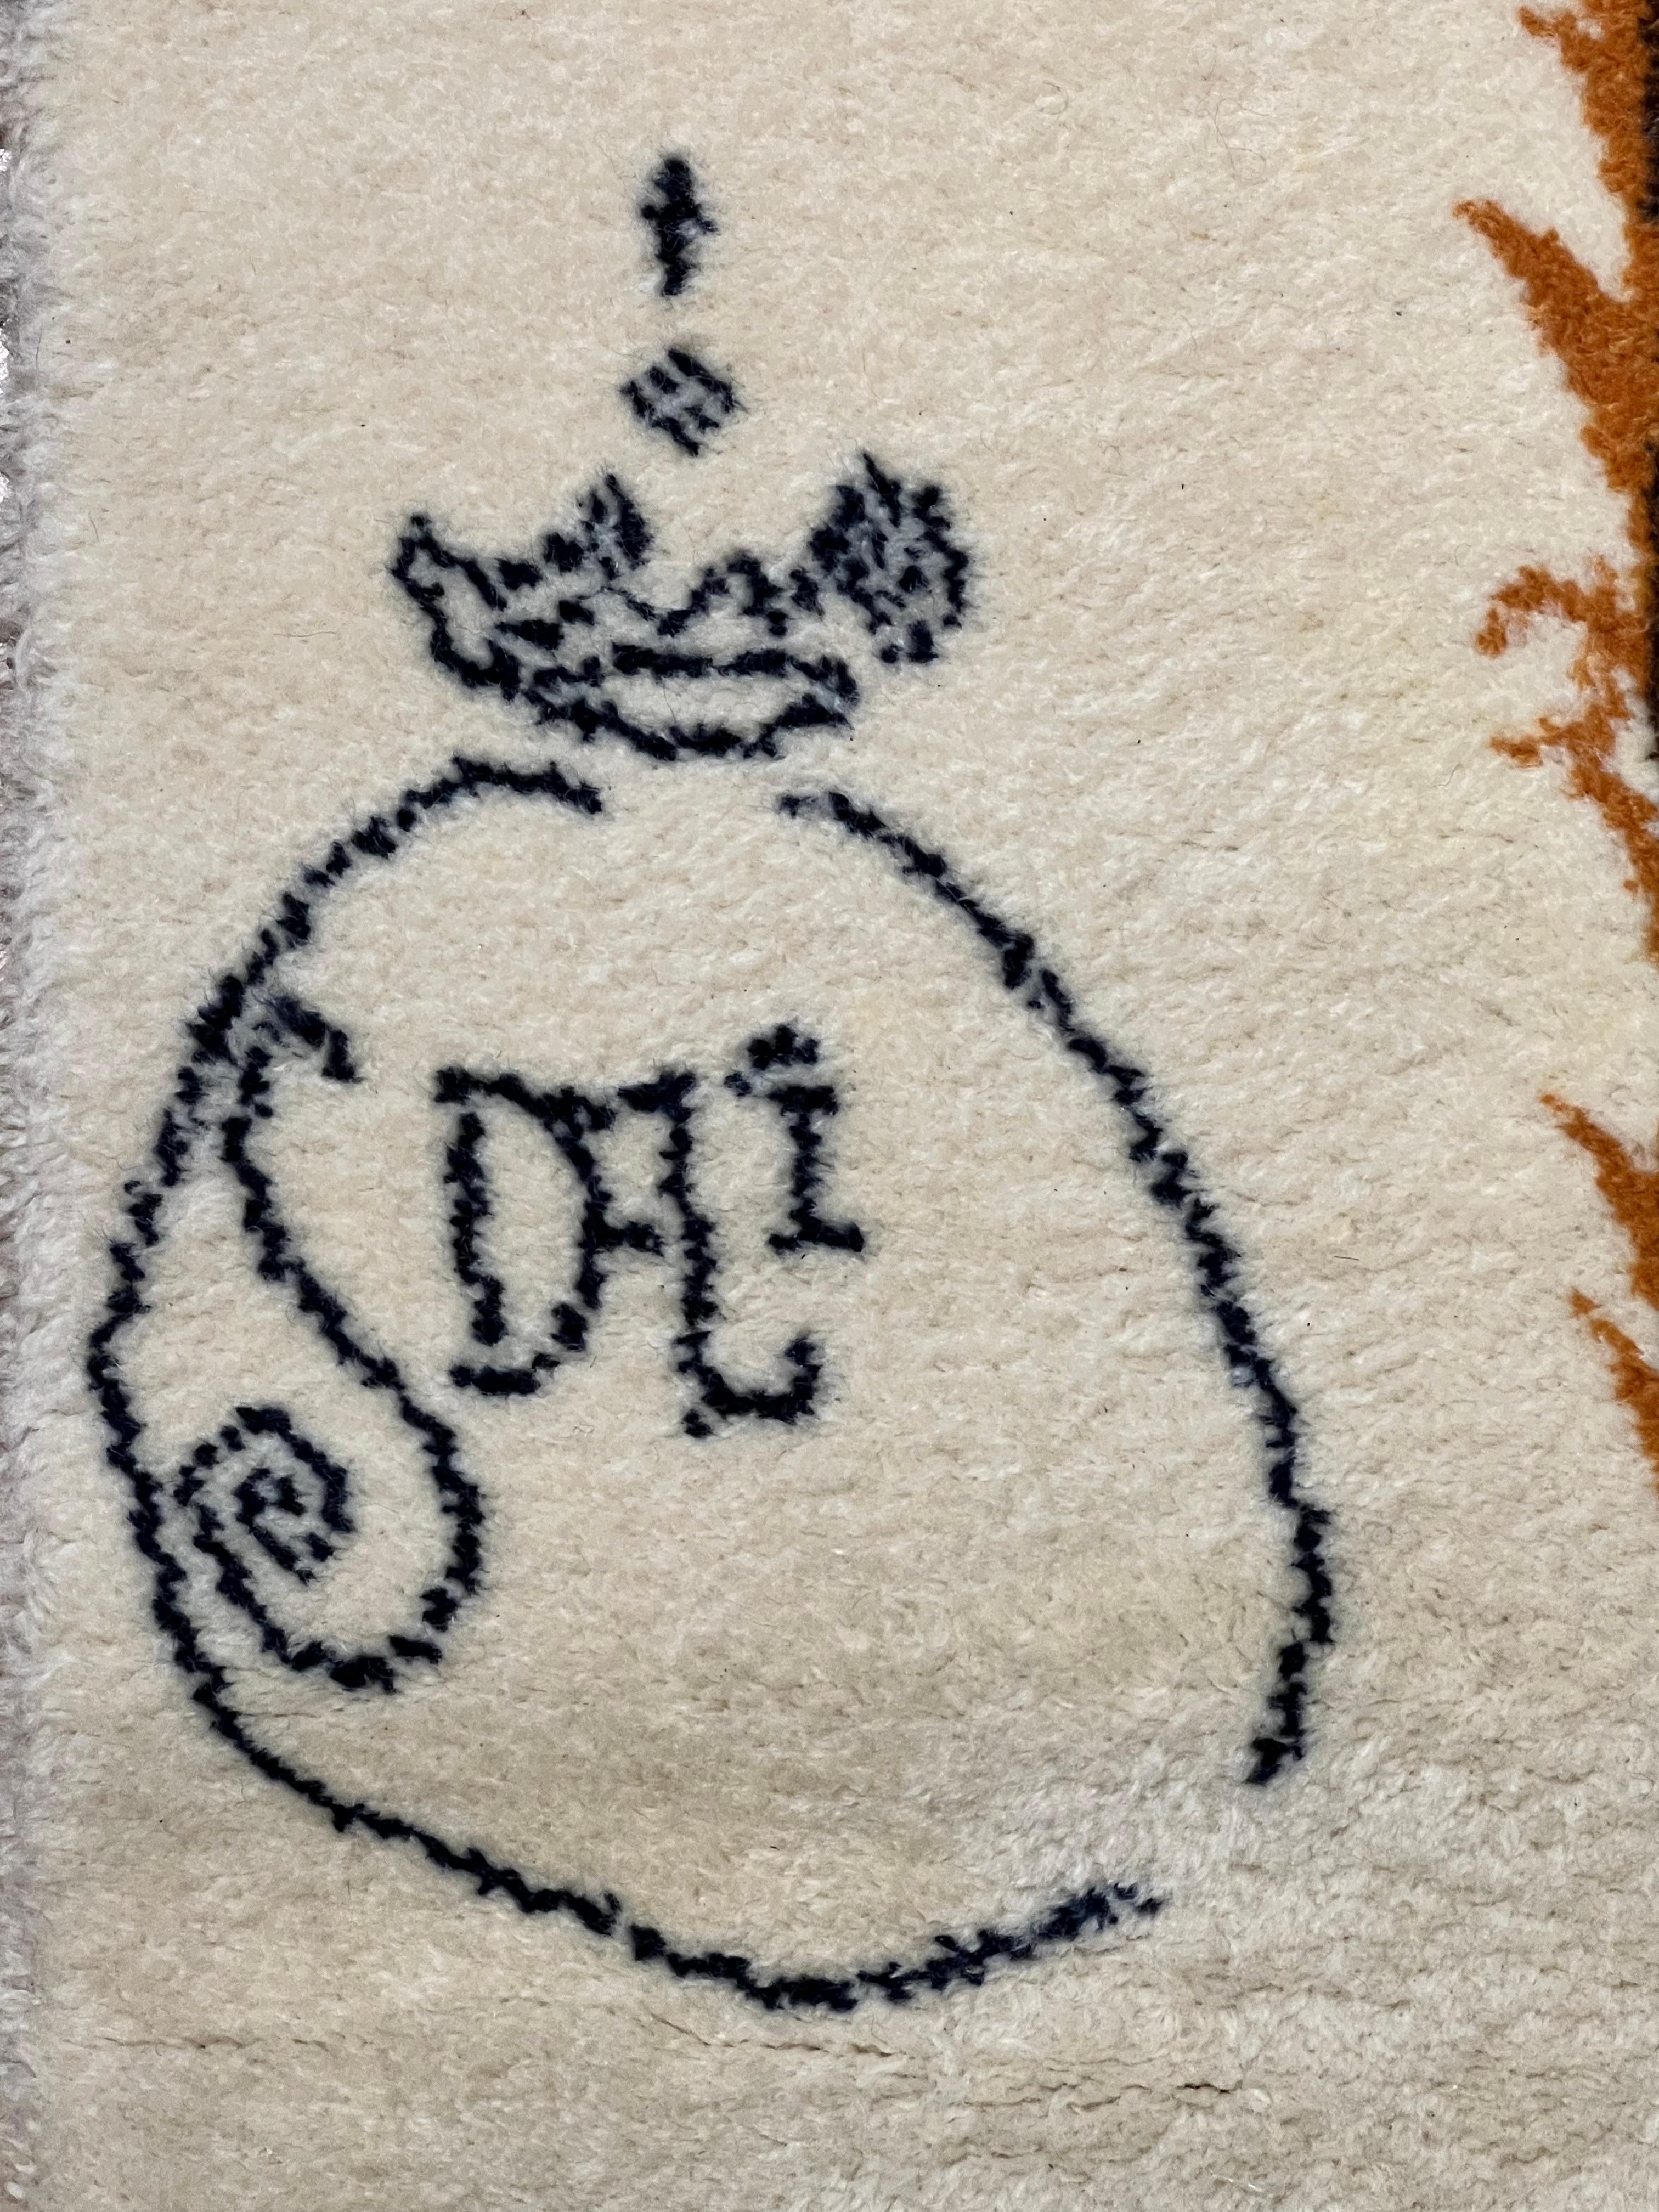 Danish 20th Century White and Blue Alice in Wonderland Salvador Dalí Rug, ca 1977 For Sale